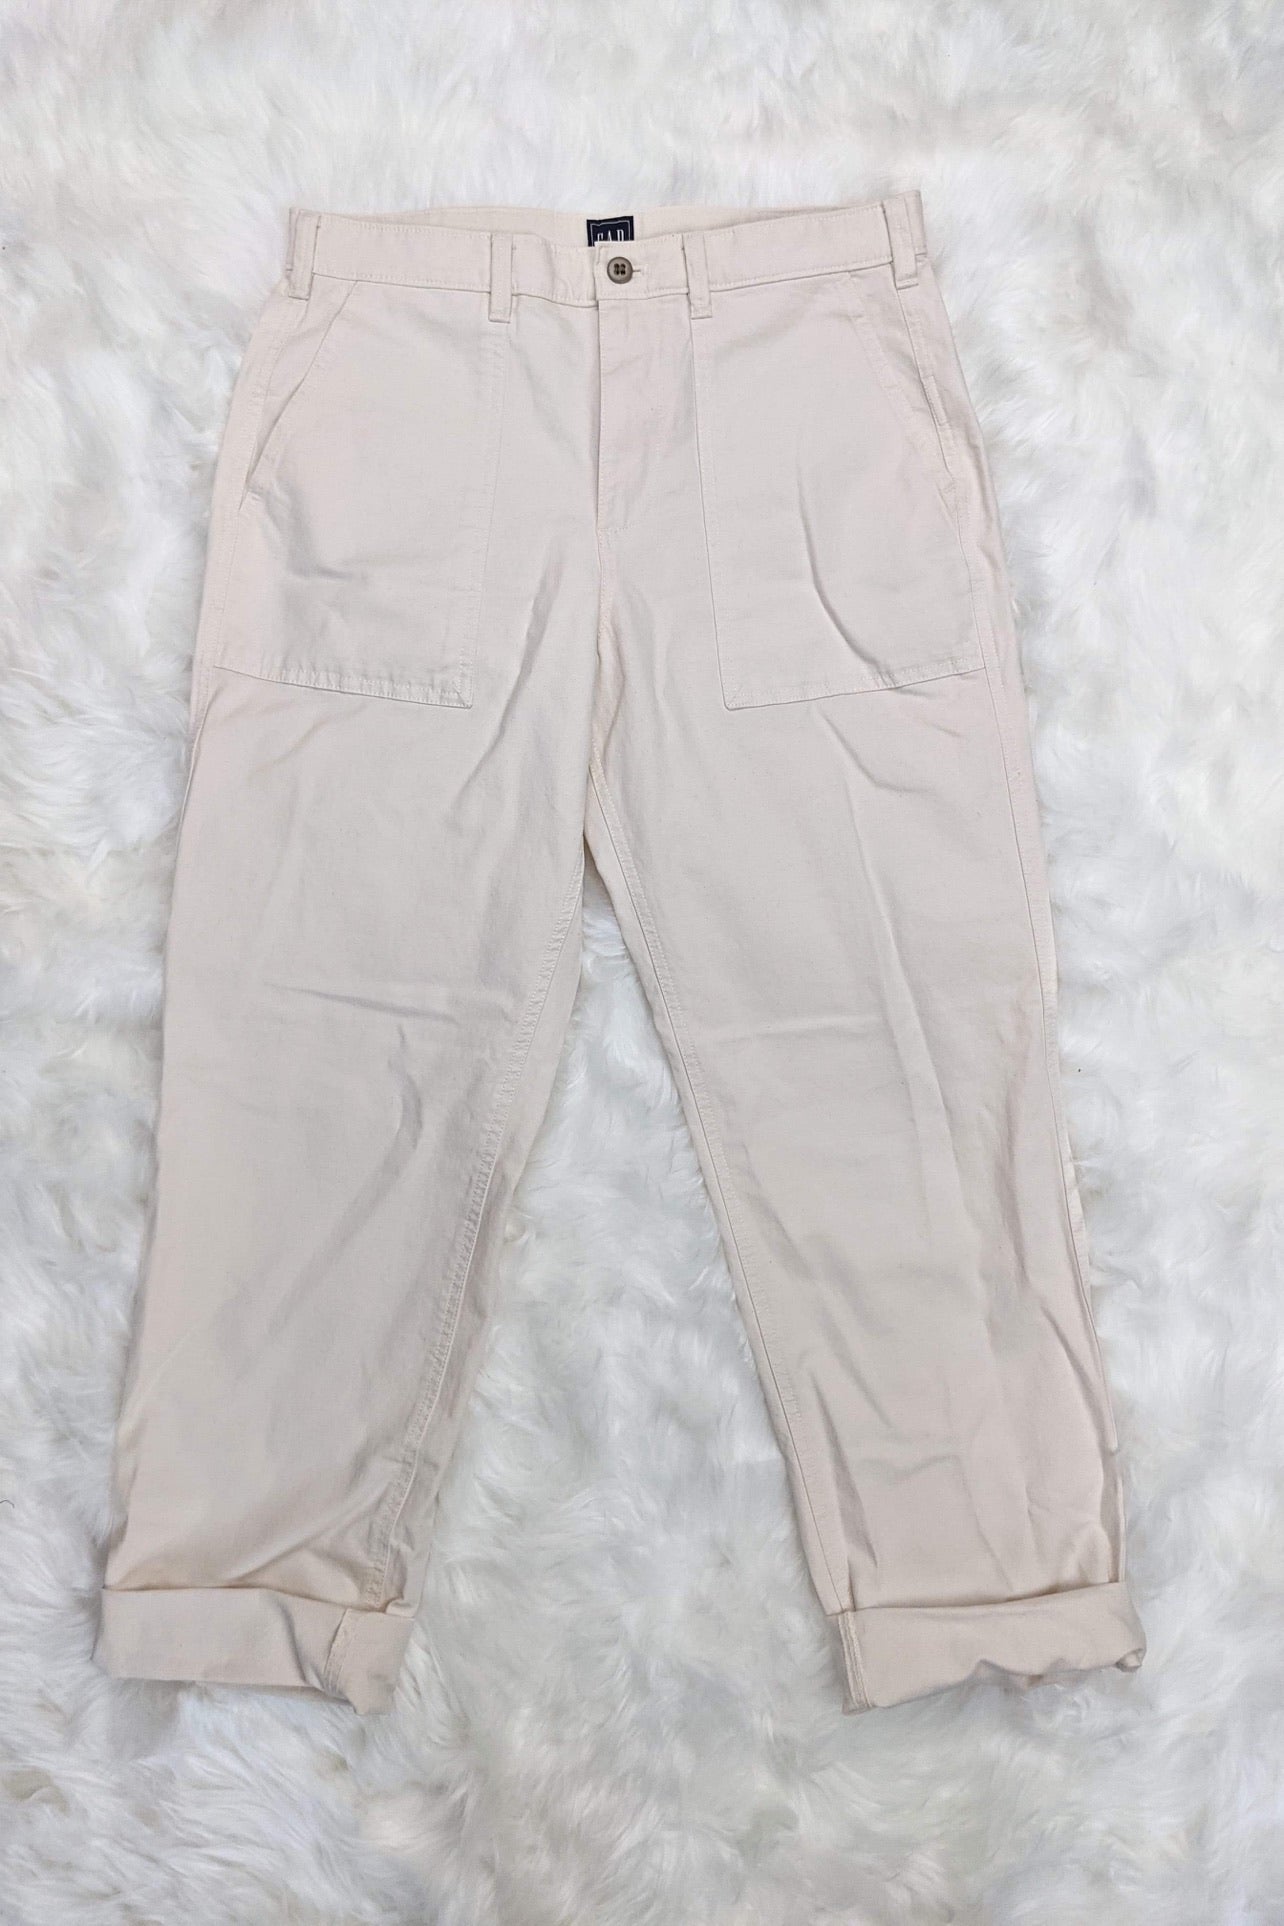 fatigue pants military army style patch pockets white retro style